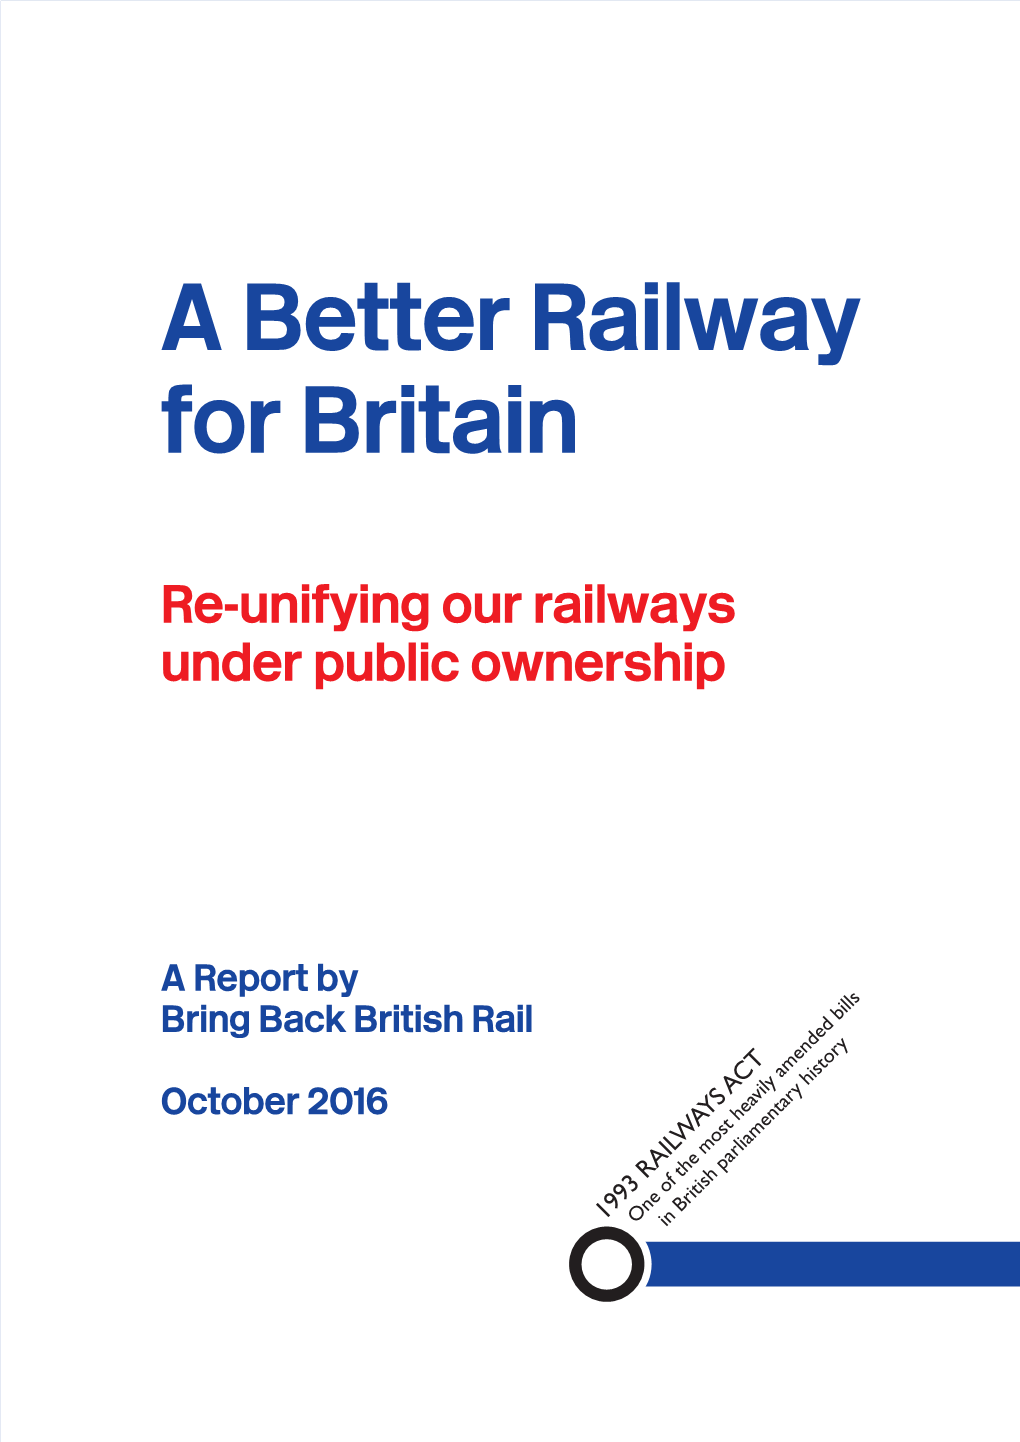 A Better Railway for Britain